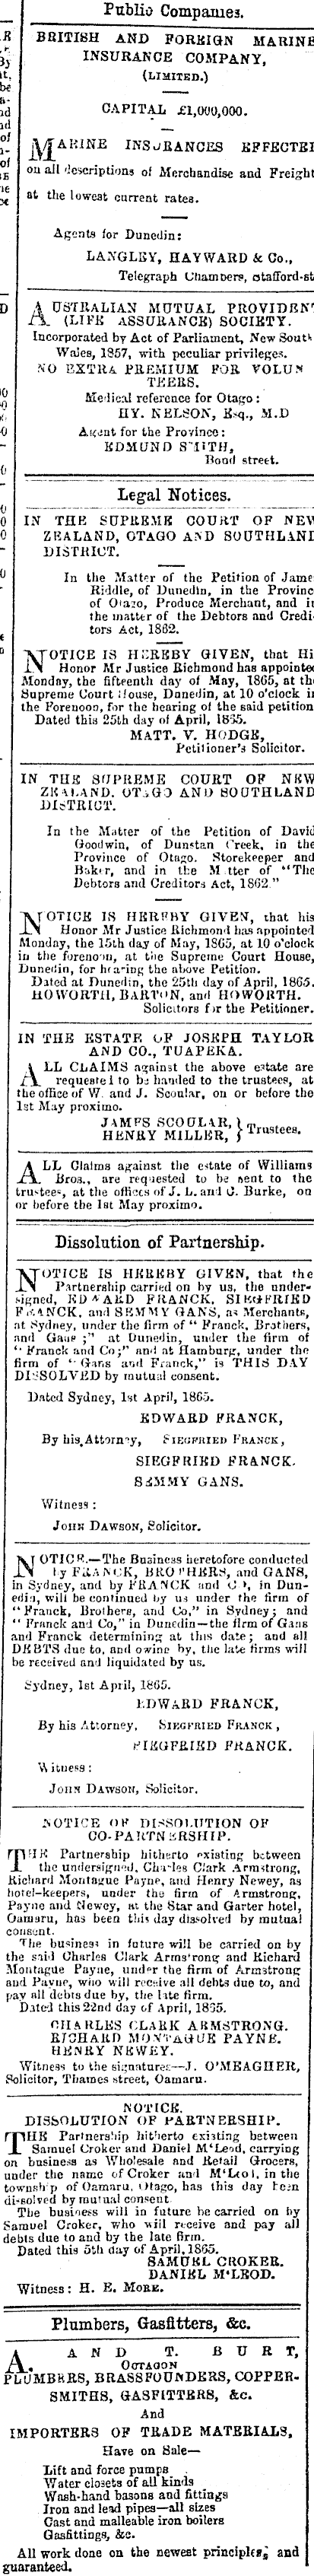 Papers Past Newspapers Otago Daily Times 27 April 1865 Page 6 Advertisements Column 3